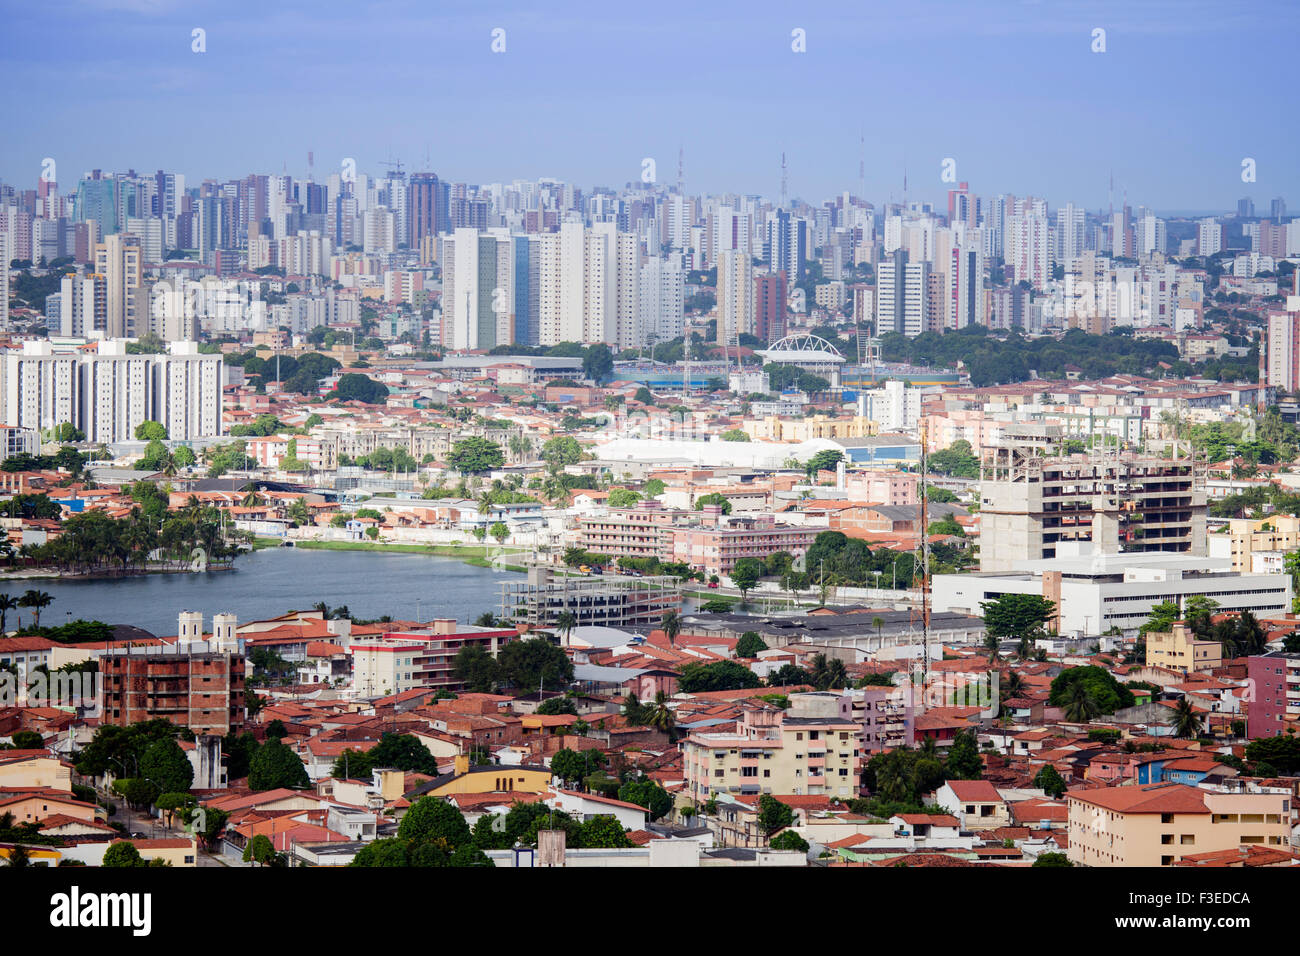 Skyline of Fortaleza city, Ceara state, Brazil with the Ceara River & skyscrapers in Iracema, Ceara, Brazil Stock Photo